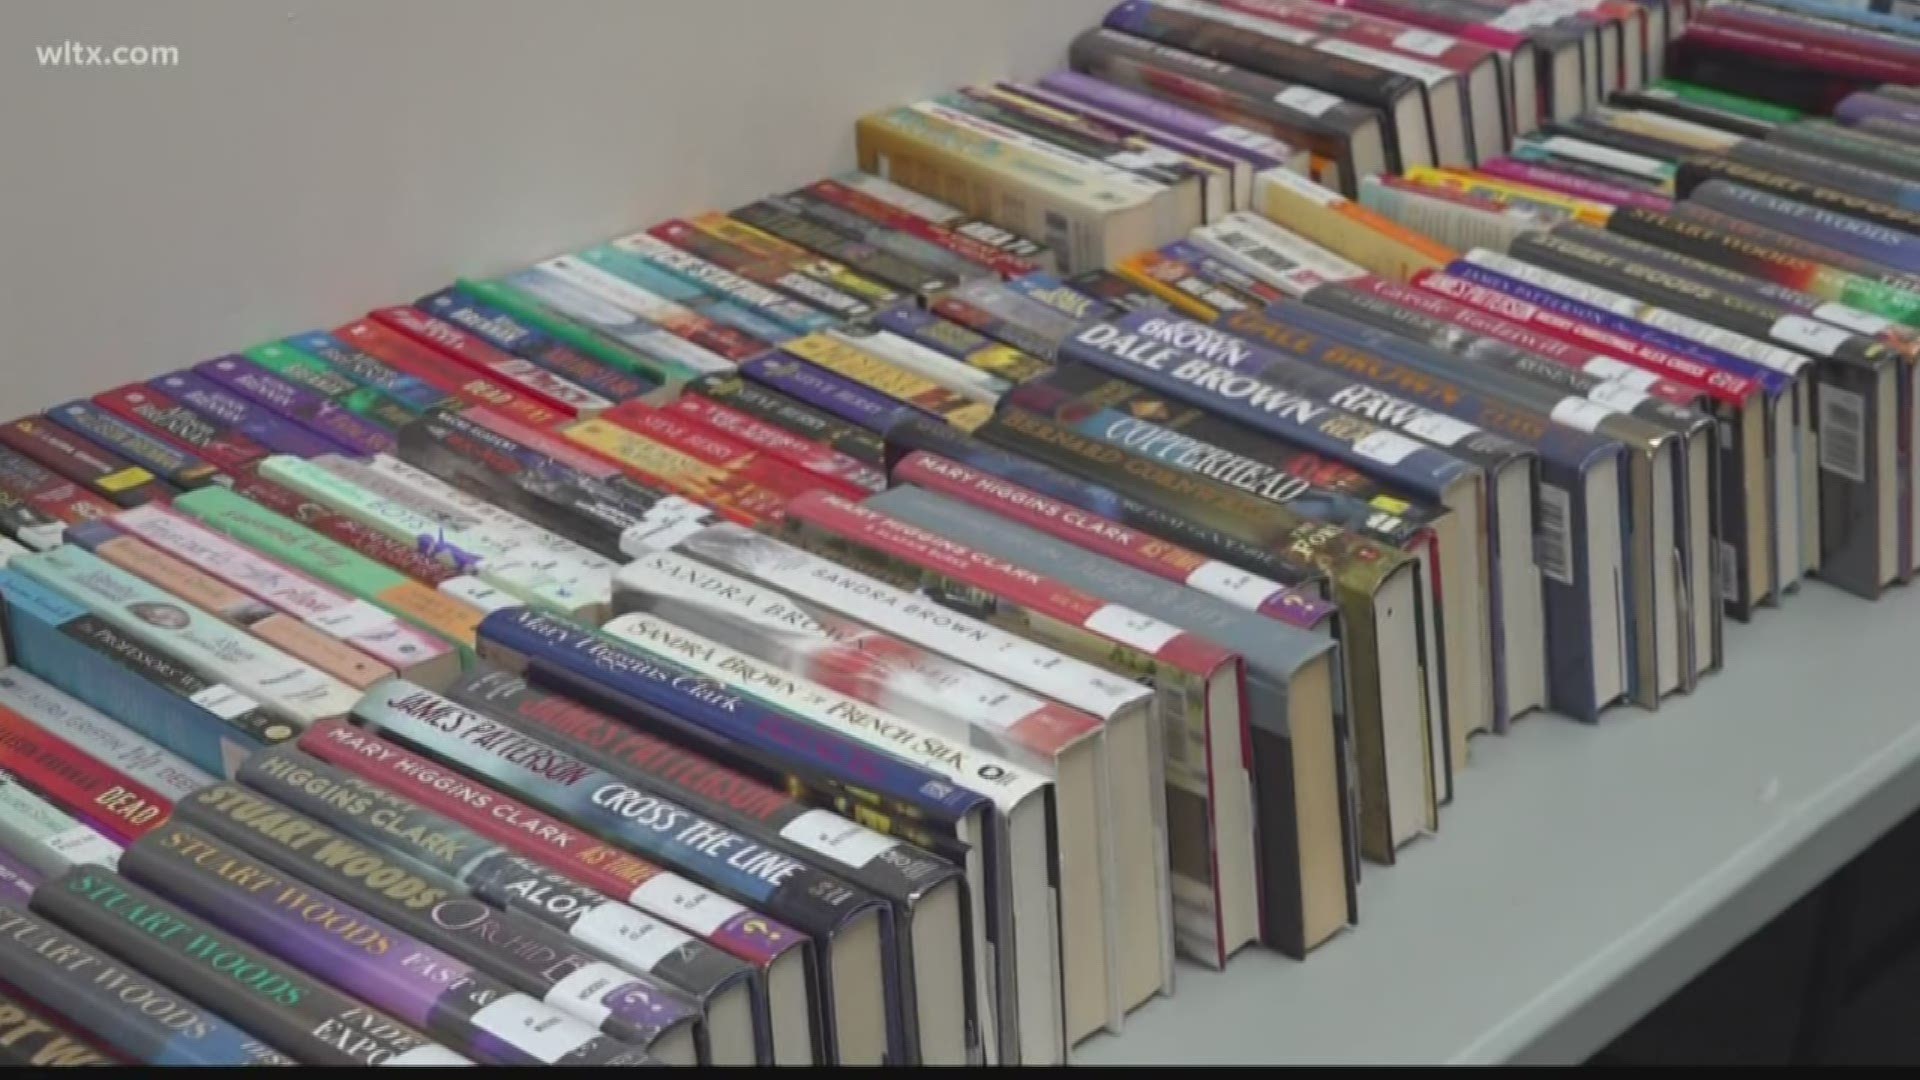 Friends of the Orangeburg county library has been around for more than 40 years. They are working inside the library to sell books that support libraries financially